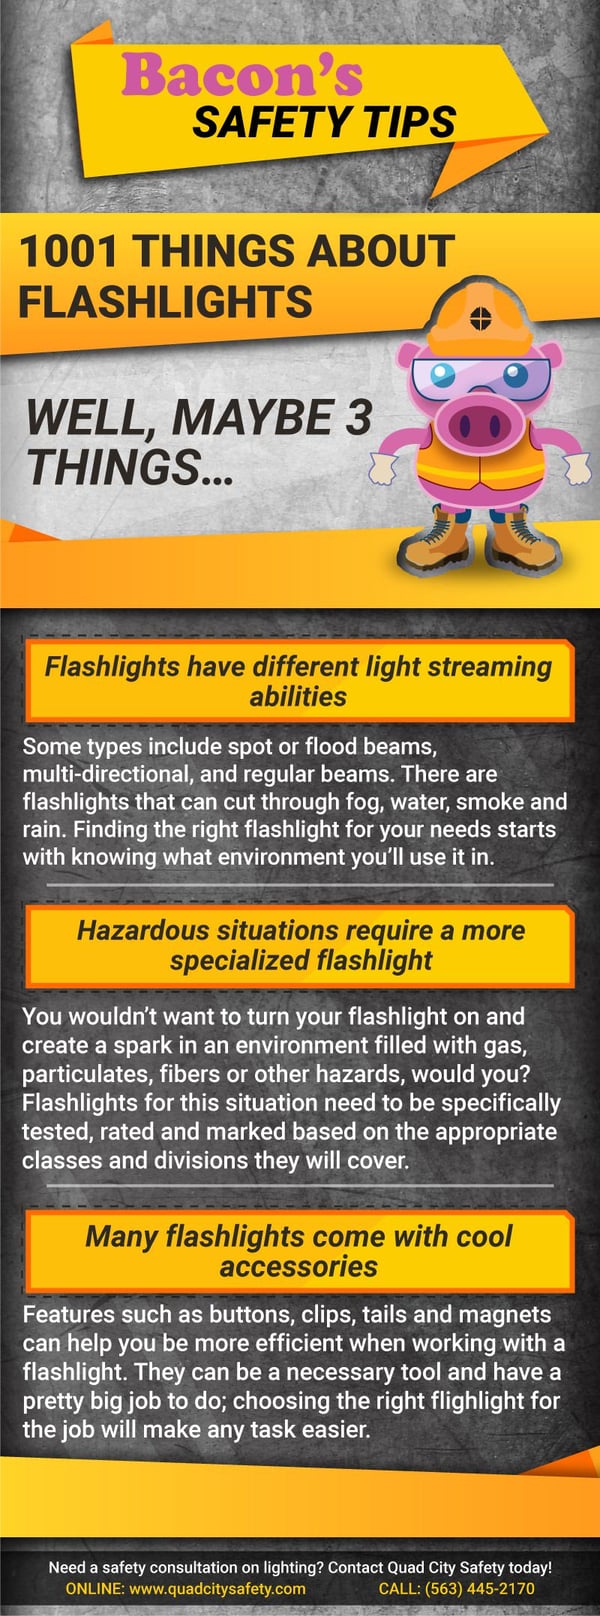 Bacon's Safety Tips 1001 Things About Flashlights